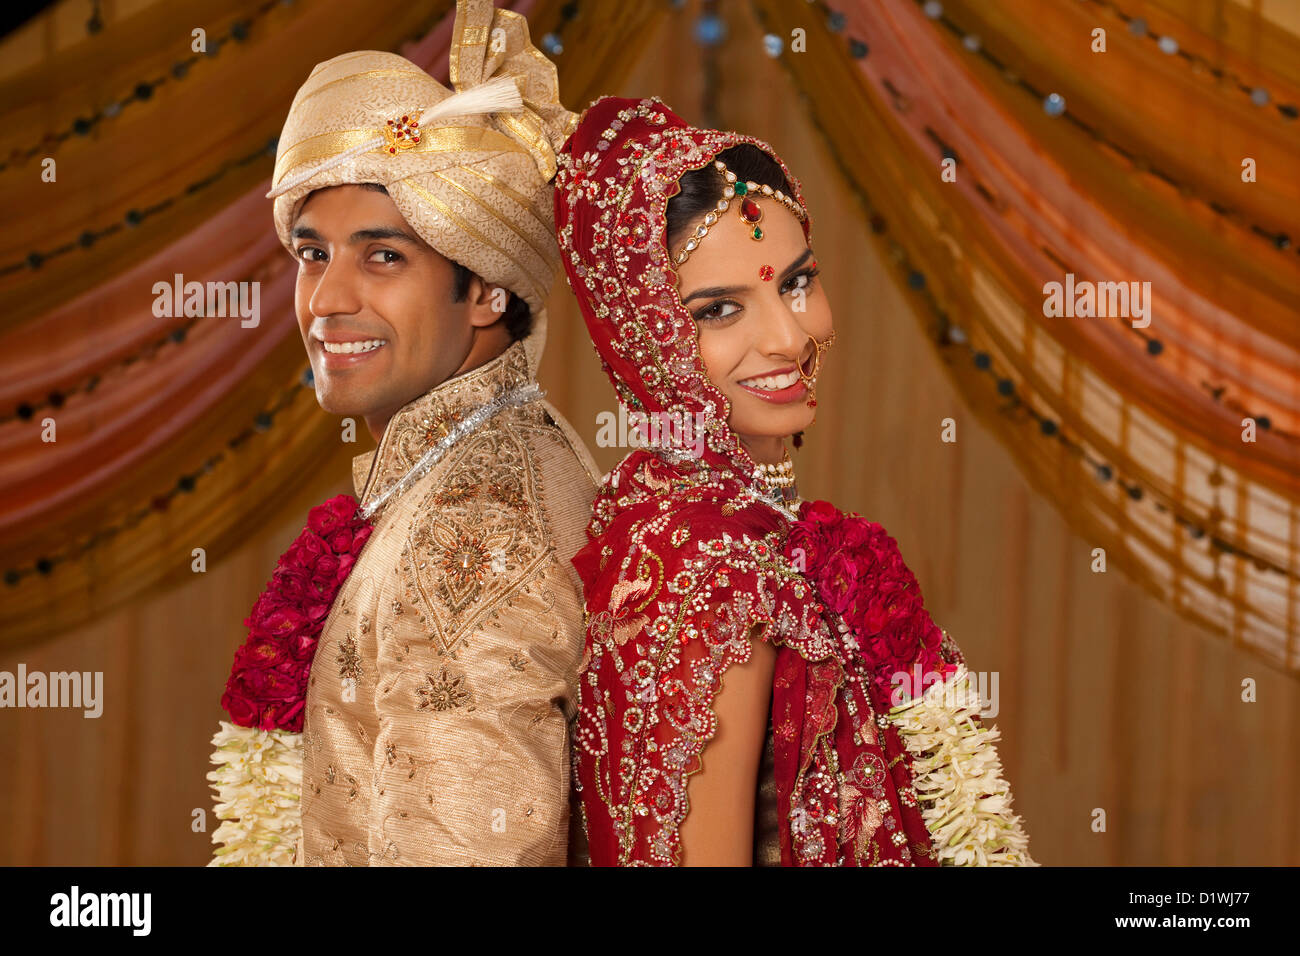 Newly Married Couples High Resolution Stock Photography And Images Alamy Marriage is an option you can participate in trio of towns. https www alamy com stock photo portrait of newly married indian couple 52808875 html